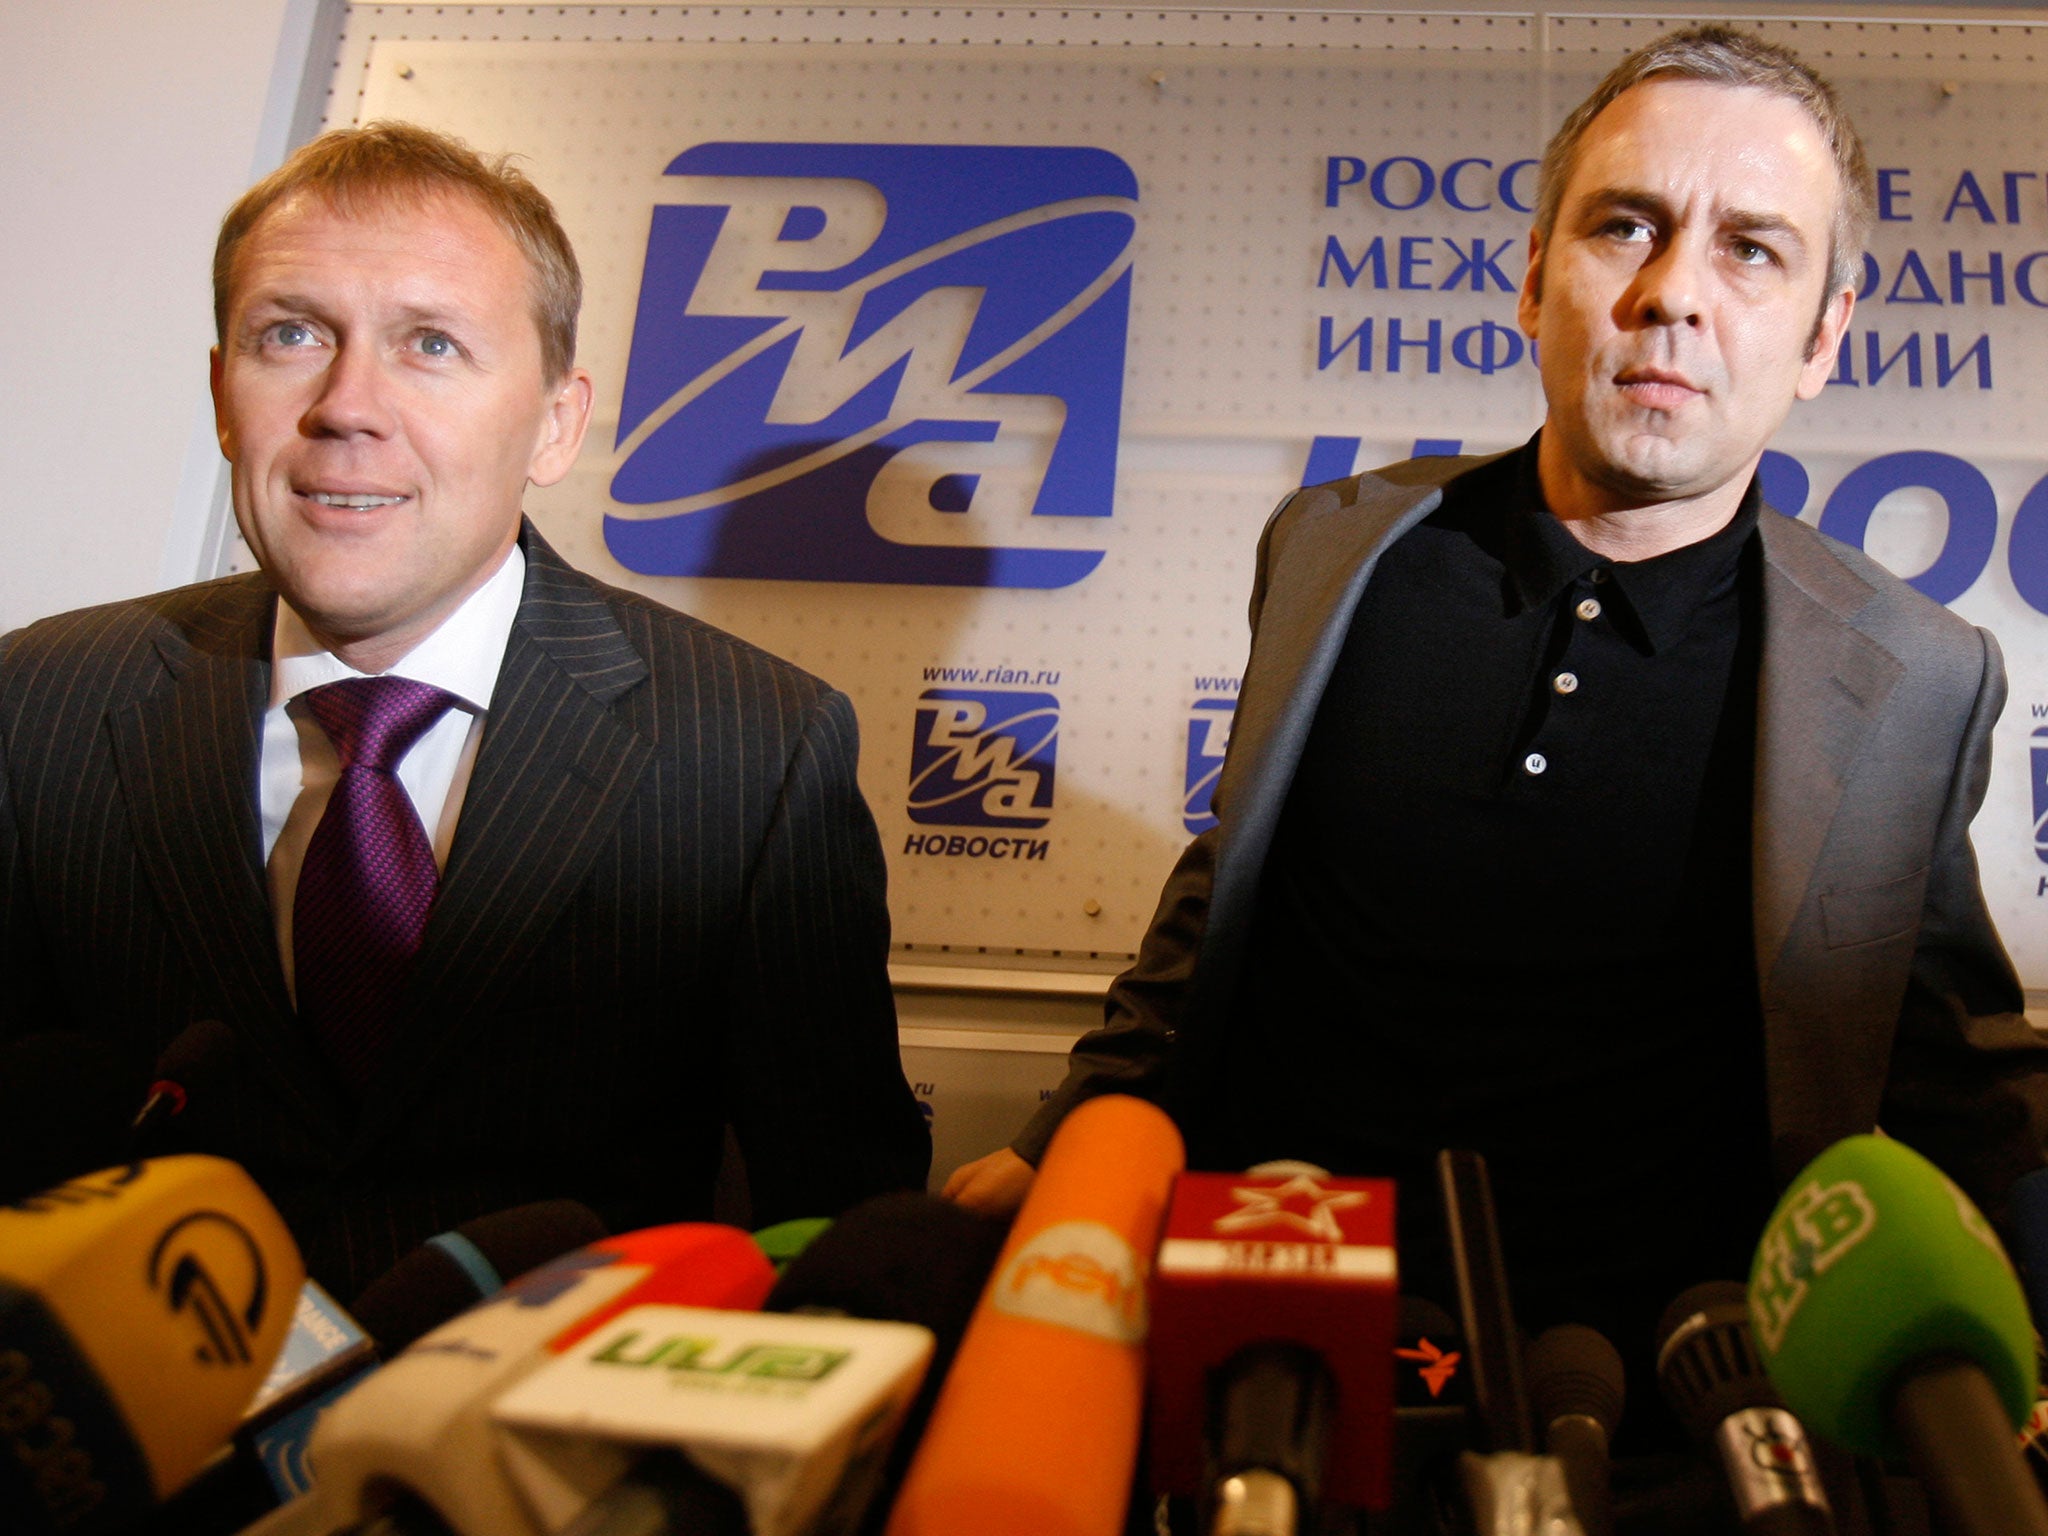 The named killers Andrei Lugovoi, left, and Dmitri Kovtun, whom Russia refused to extradite